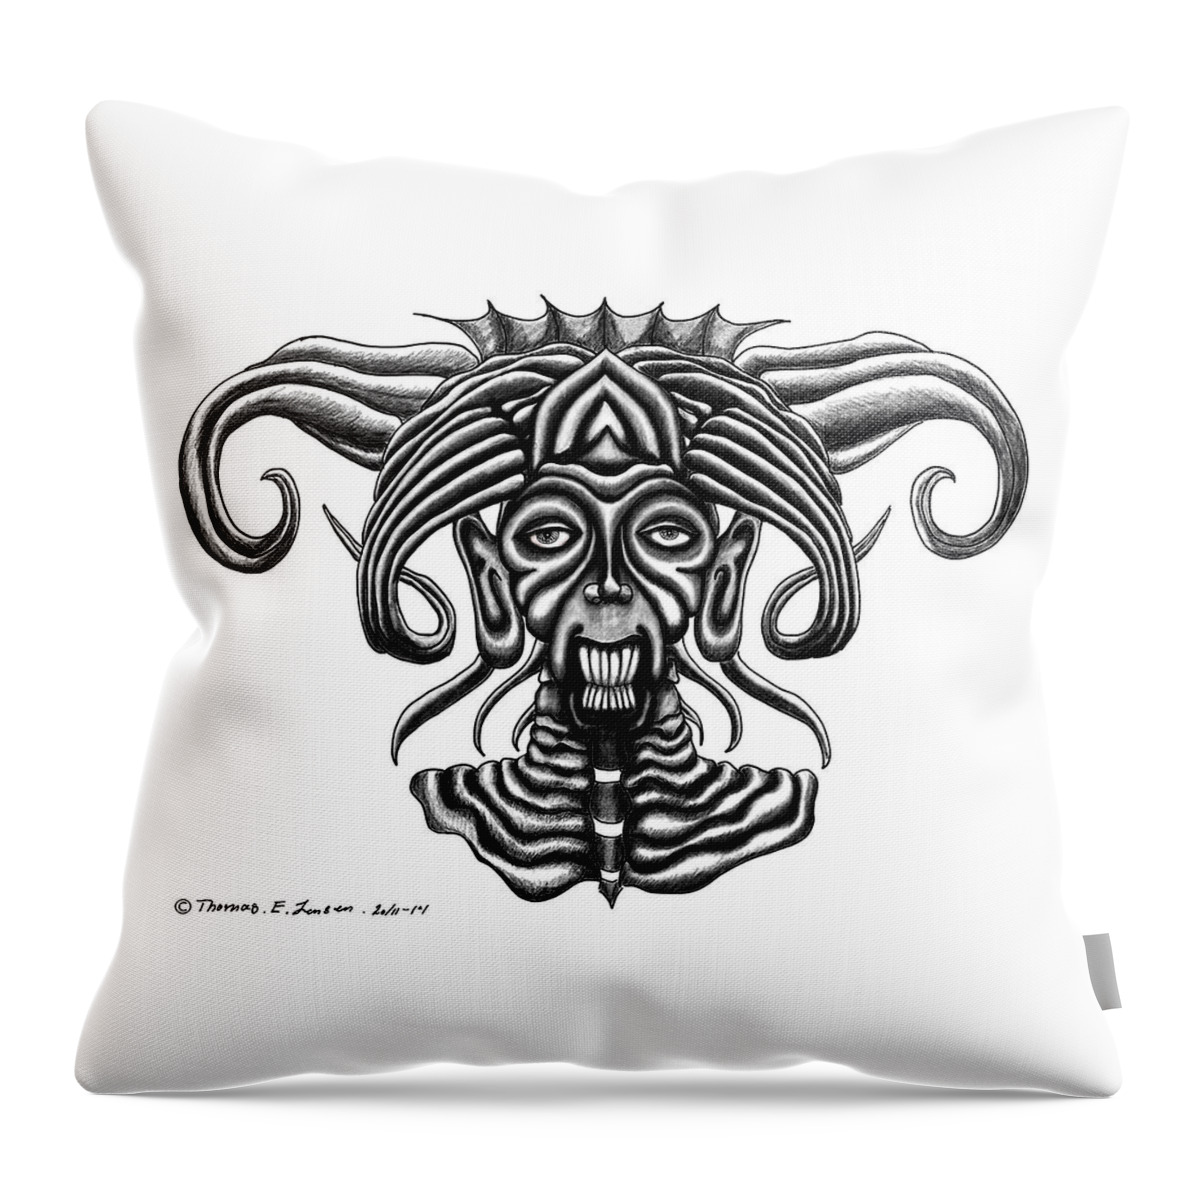 Sketch Throw Pillow featuring the digital art Tribal Leader by ThomasE Jensen